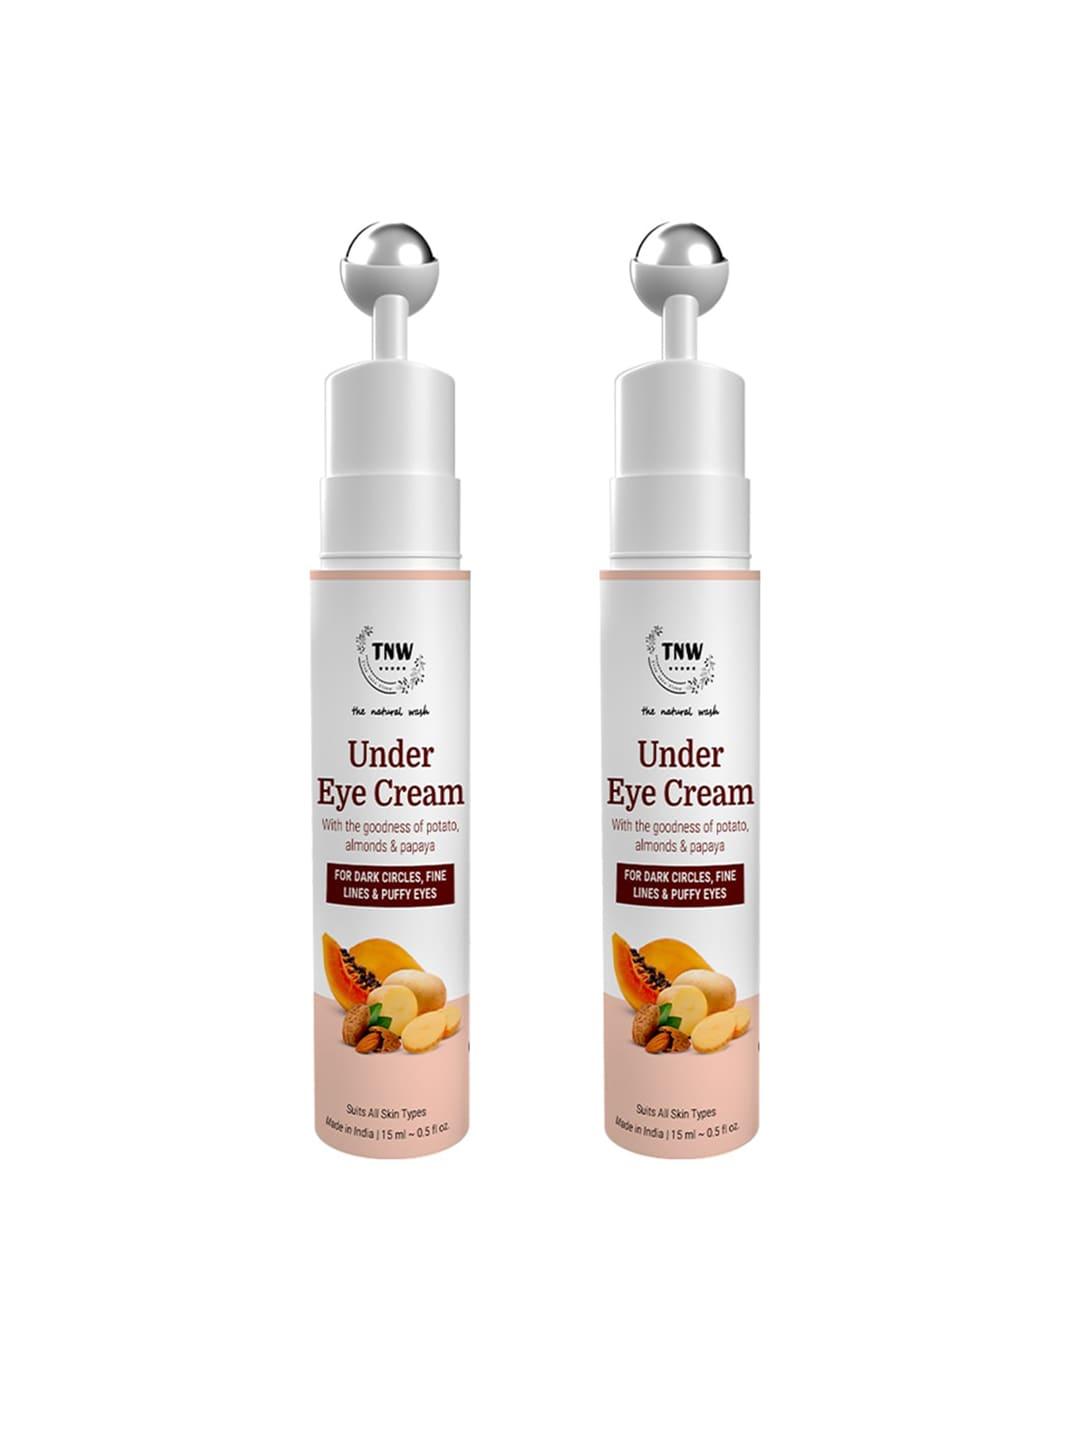 TNW the natural wash Set Of 2 Under Eye Cream With Cooling Massage Roller 15 ml Each